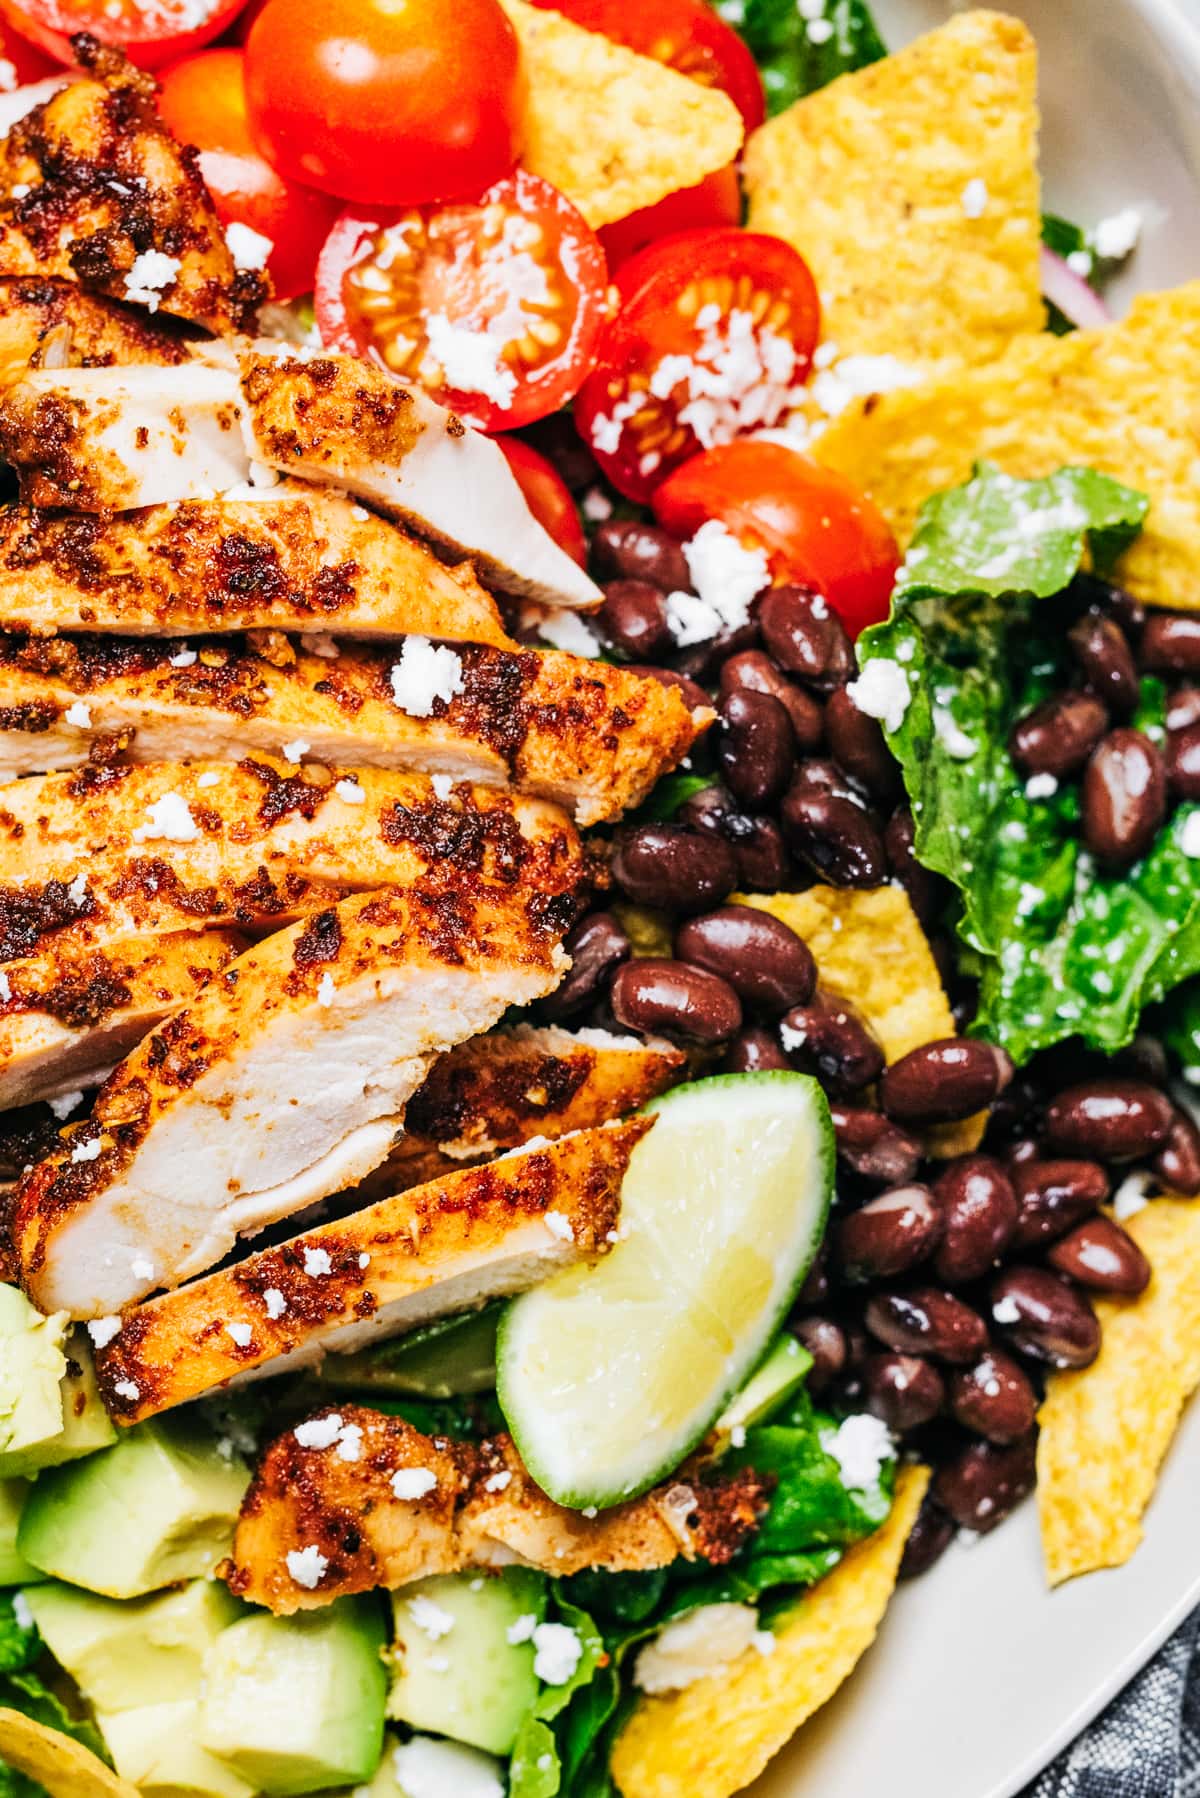 Close-up image of sliced grilled chicken arranged on over lettuce greens, tomatoes, black beans, and nacho chips.